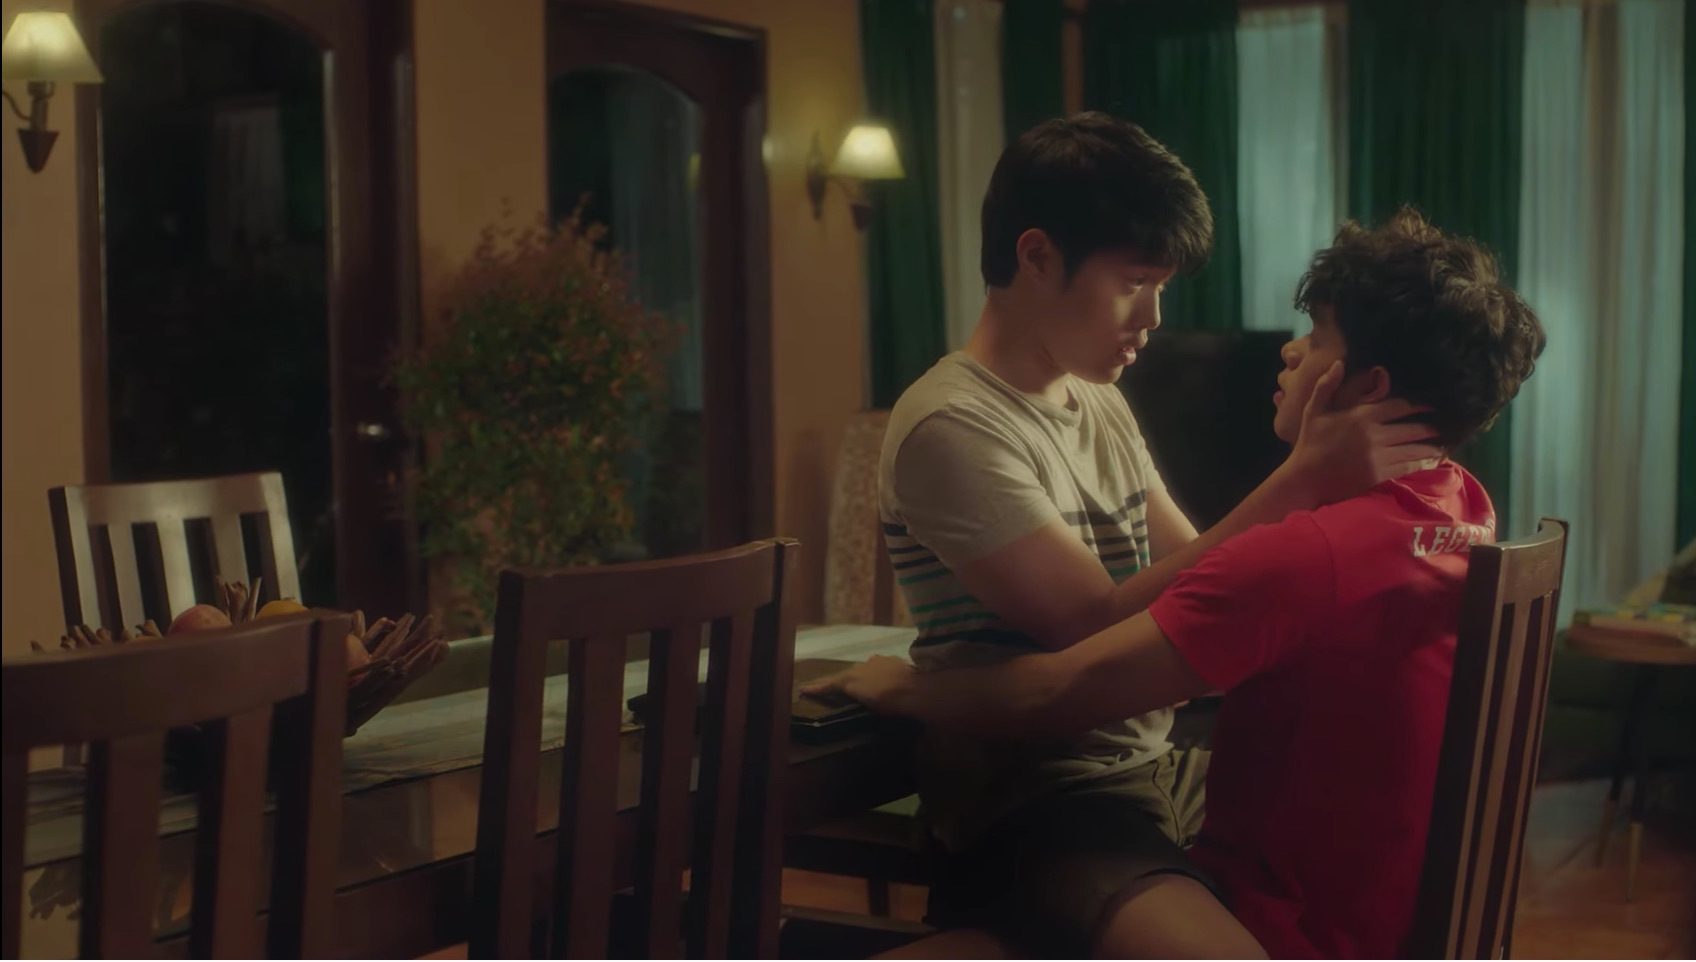 WATCH: Cai and Gav get really close in ‘Gameboys’ season 2 teaser